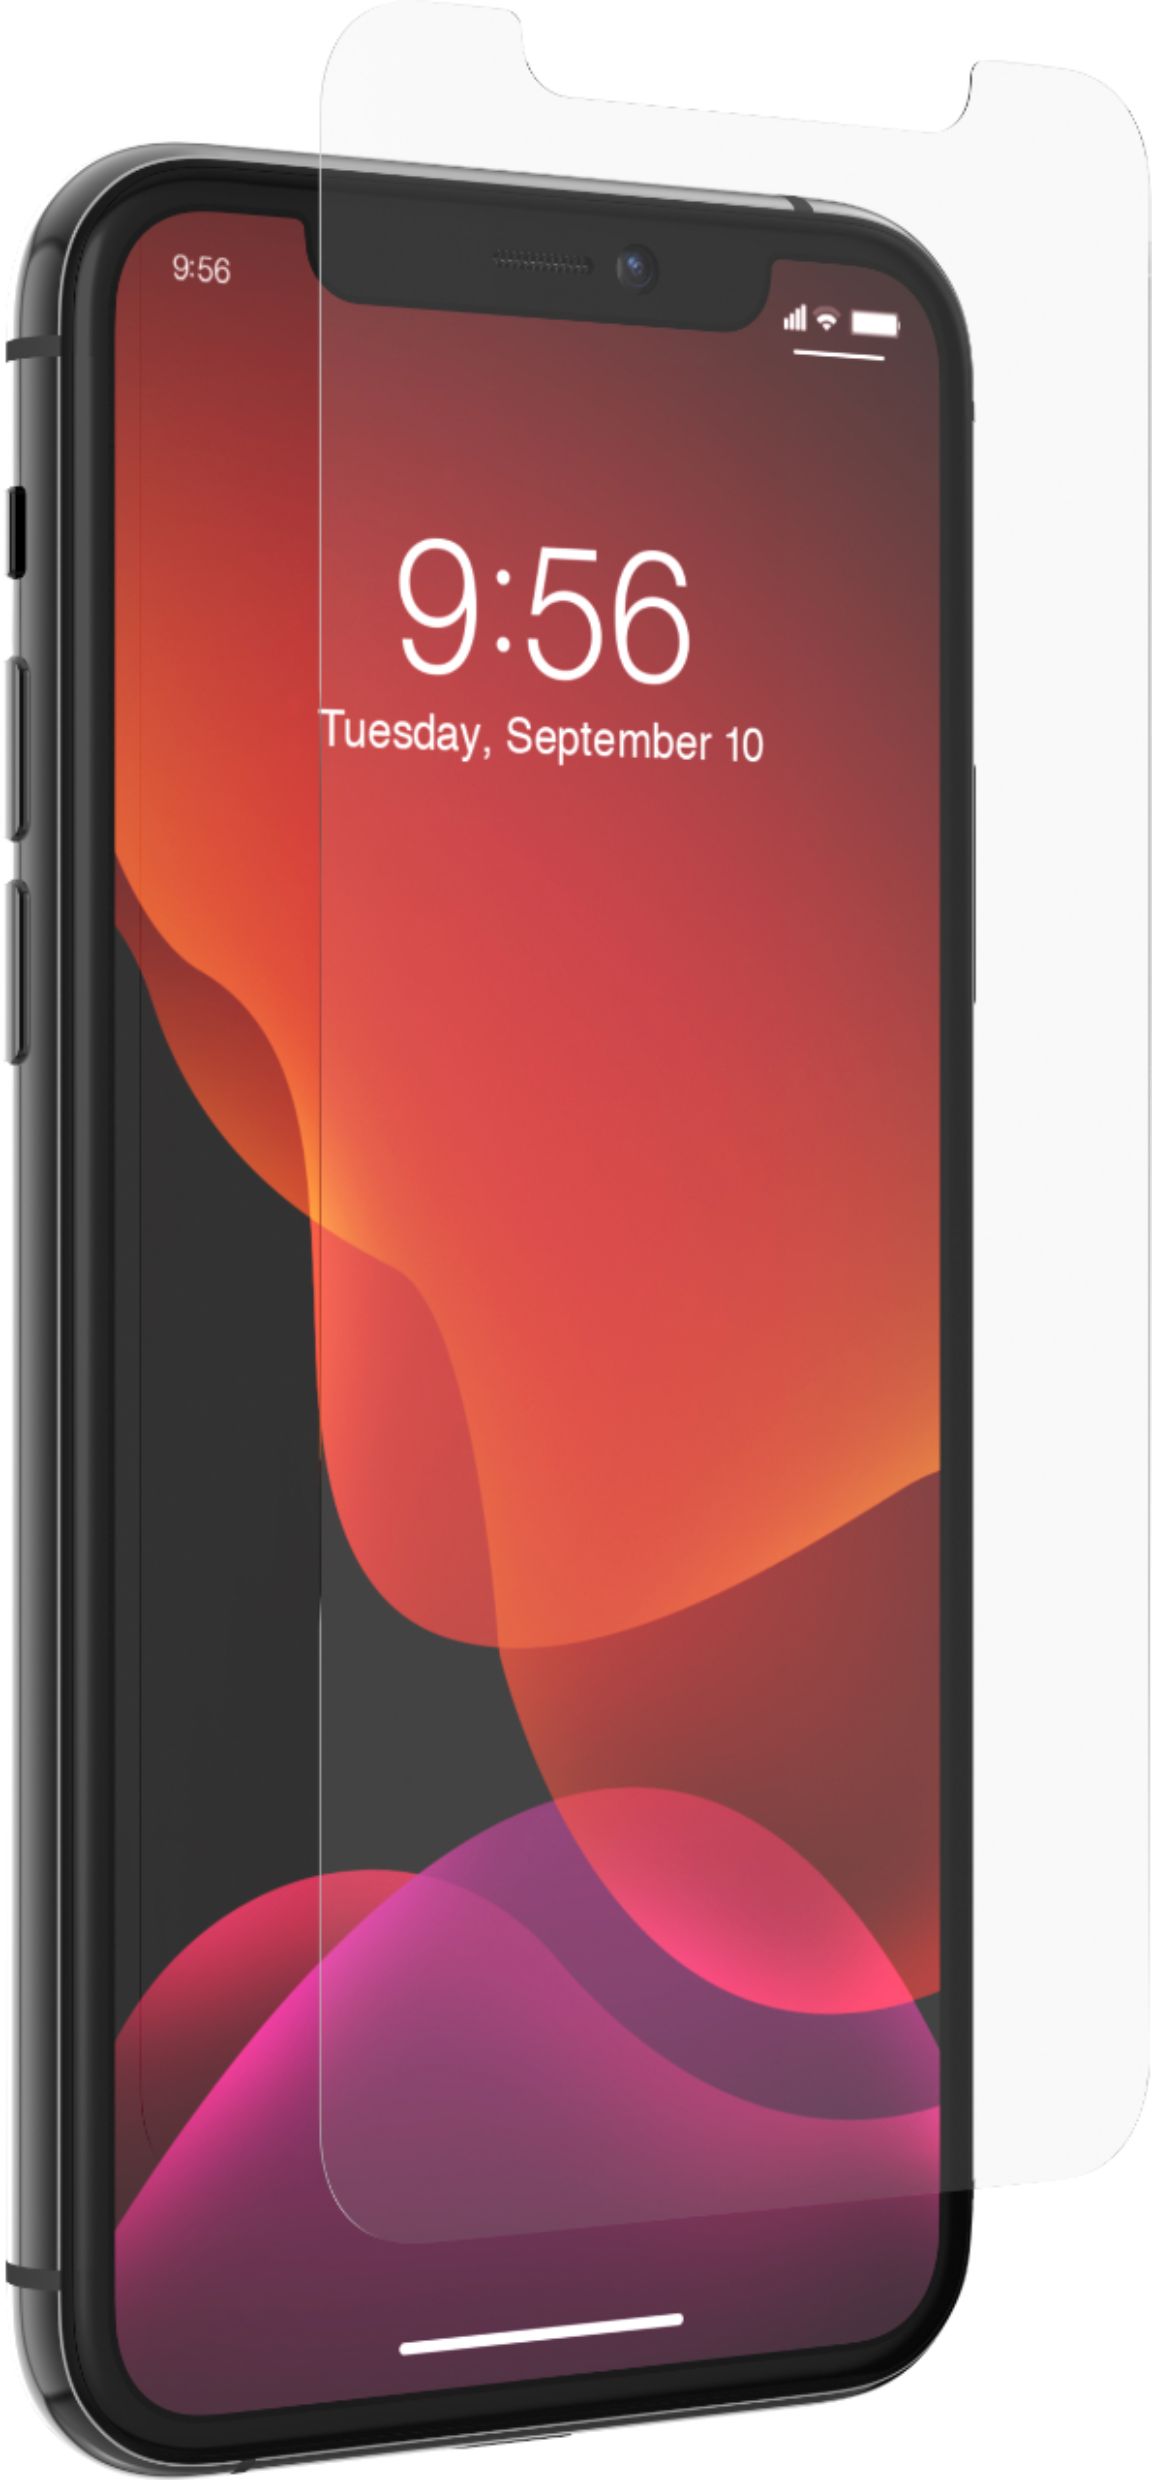 Angle View: Apple - iPhone XS Max 64GB - Space Gray (Sprint)